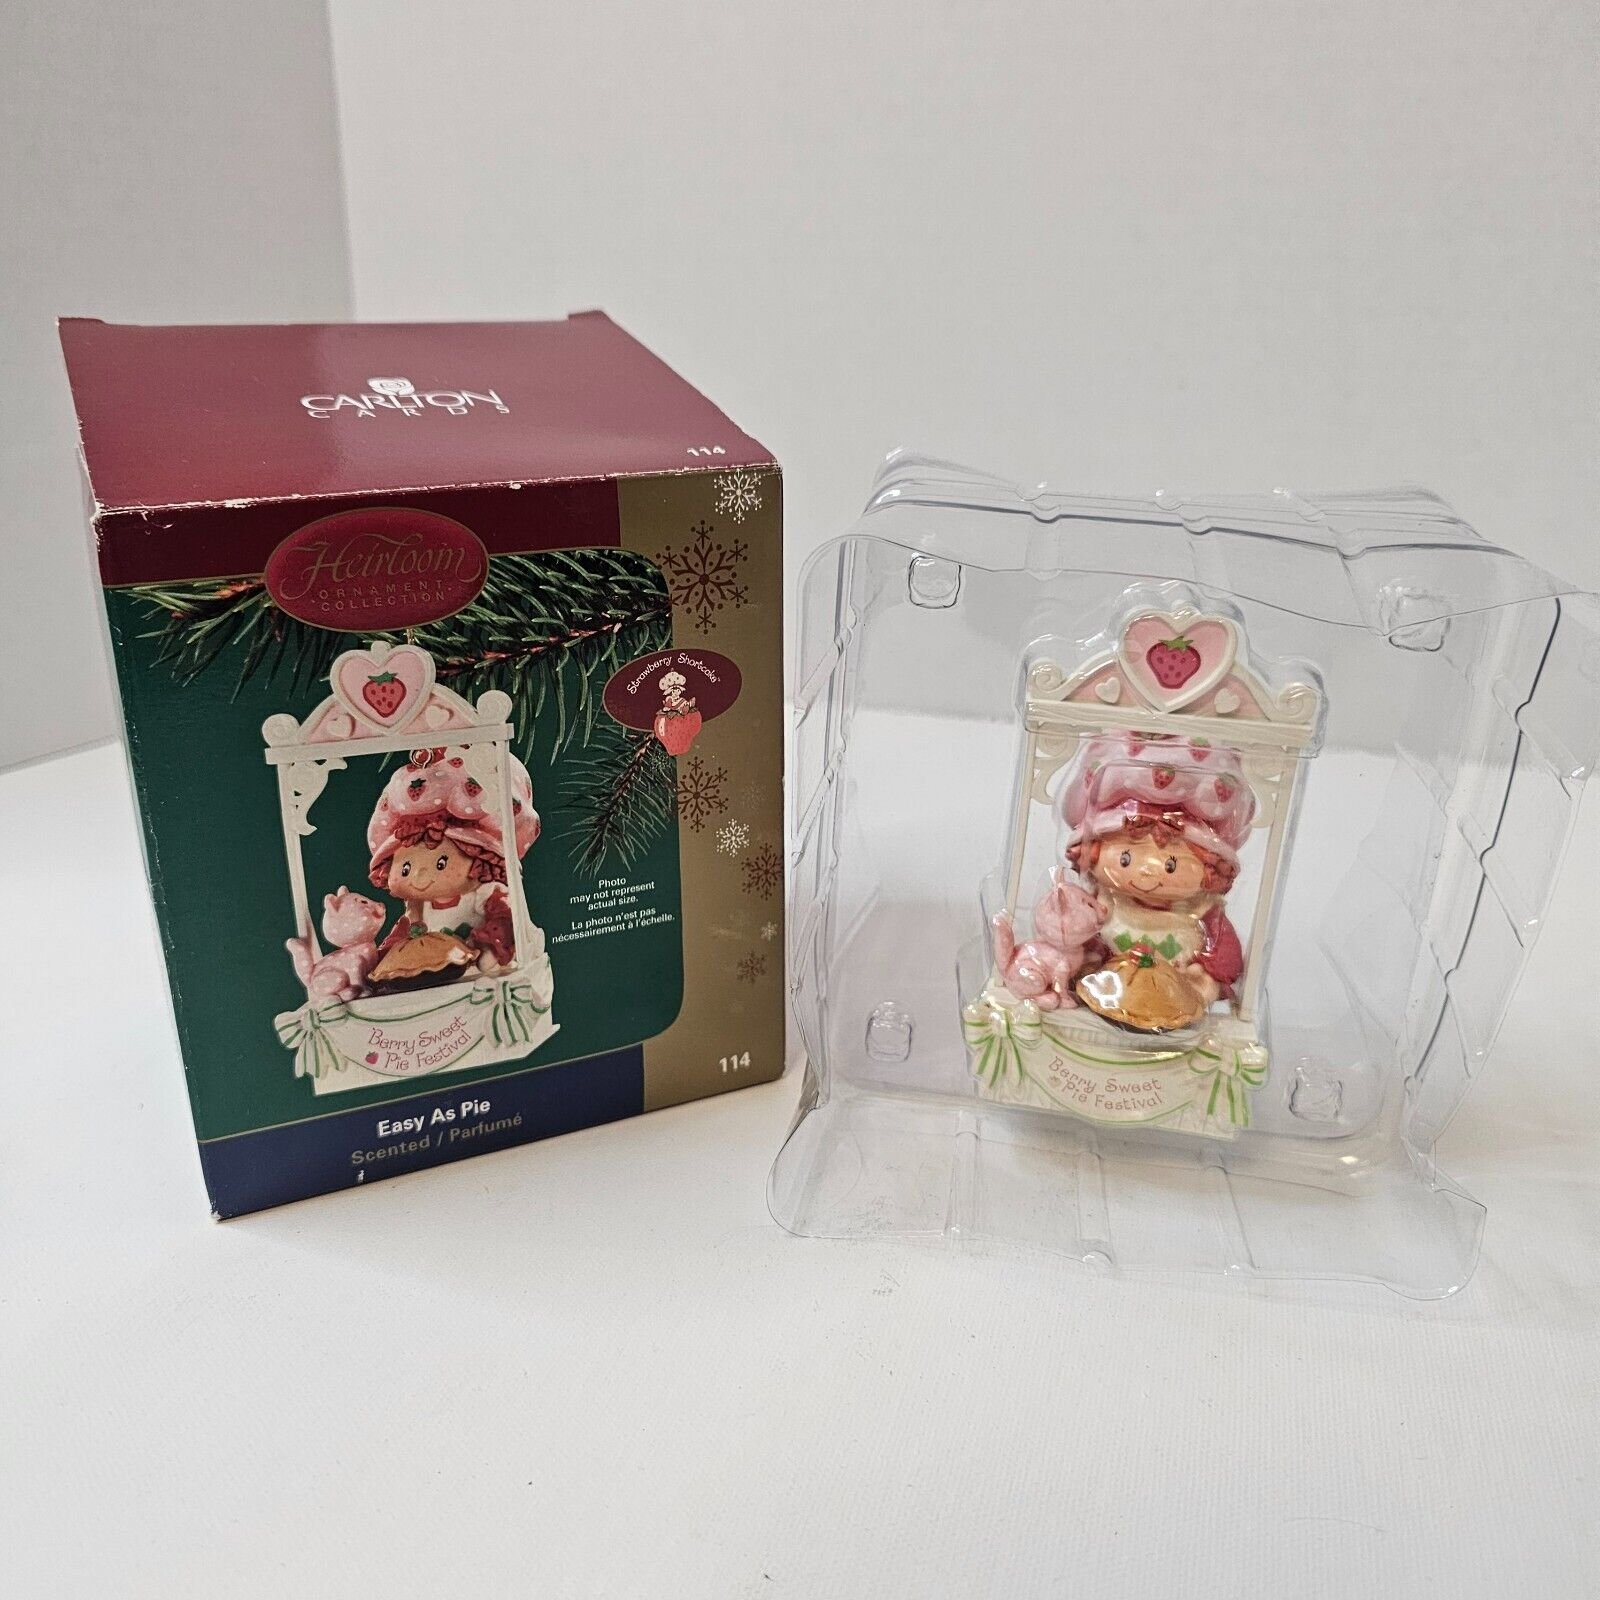 Carlton Heirloom Ornament Collection Strawberry Shortcake Easy As Pie Scented